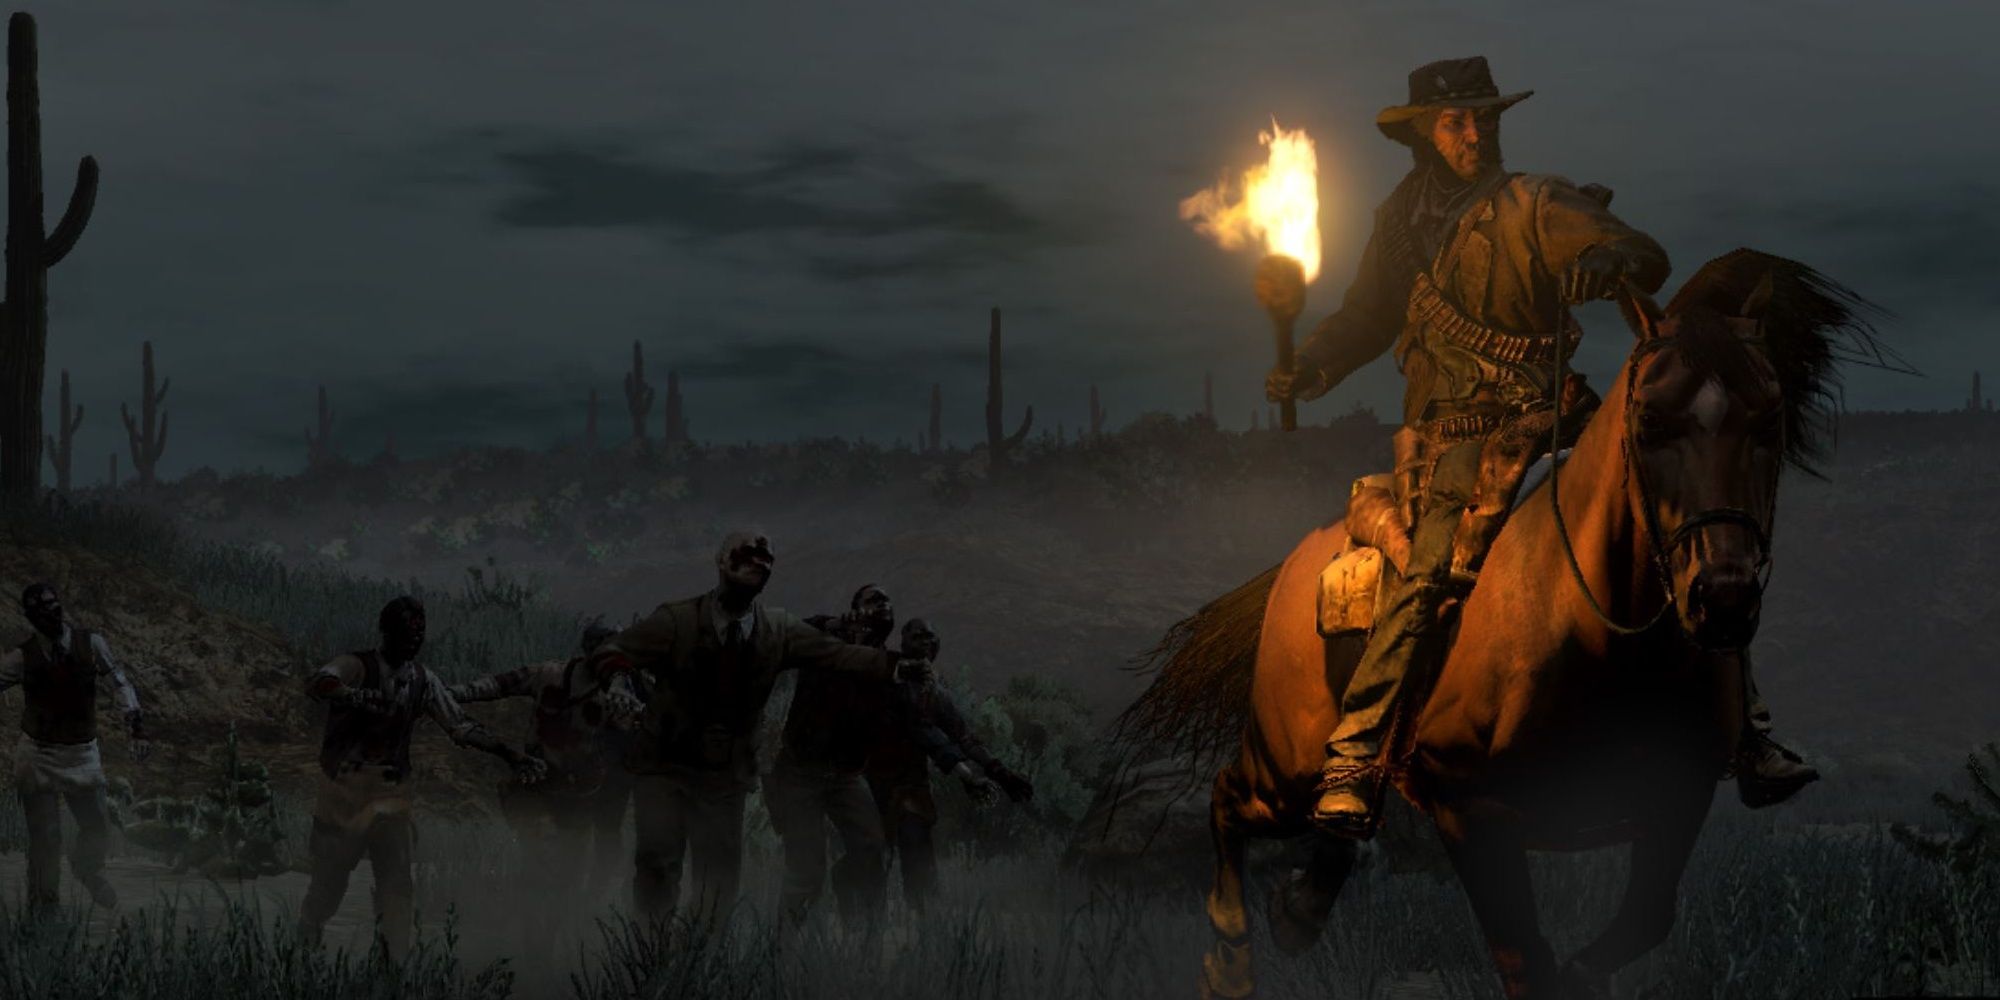 RDR: Undead nightmare, John riding away from zombies with a torch